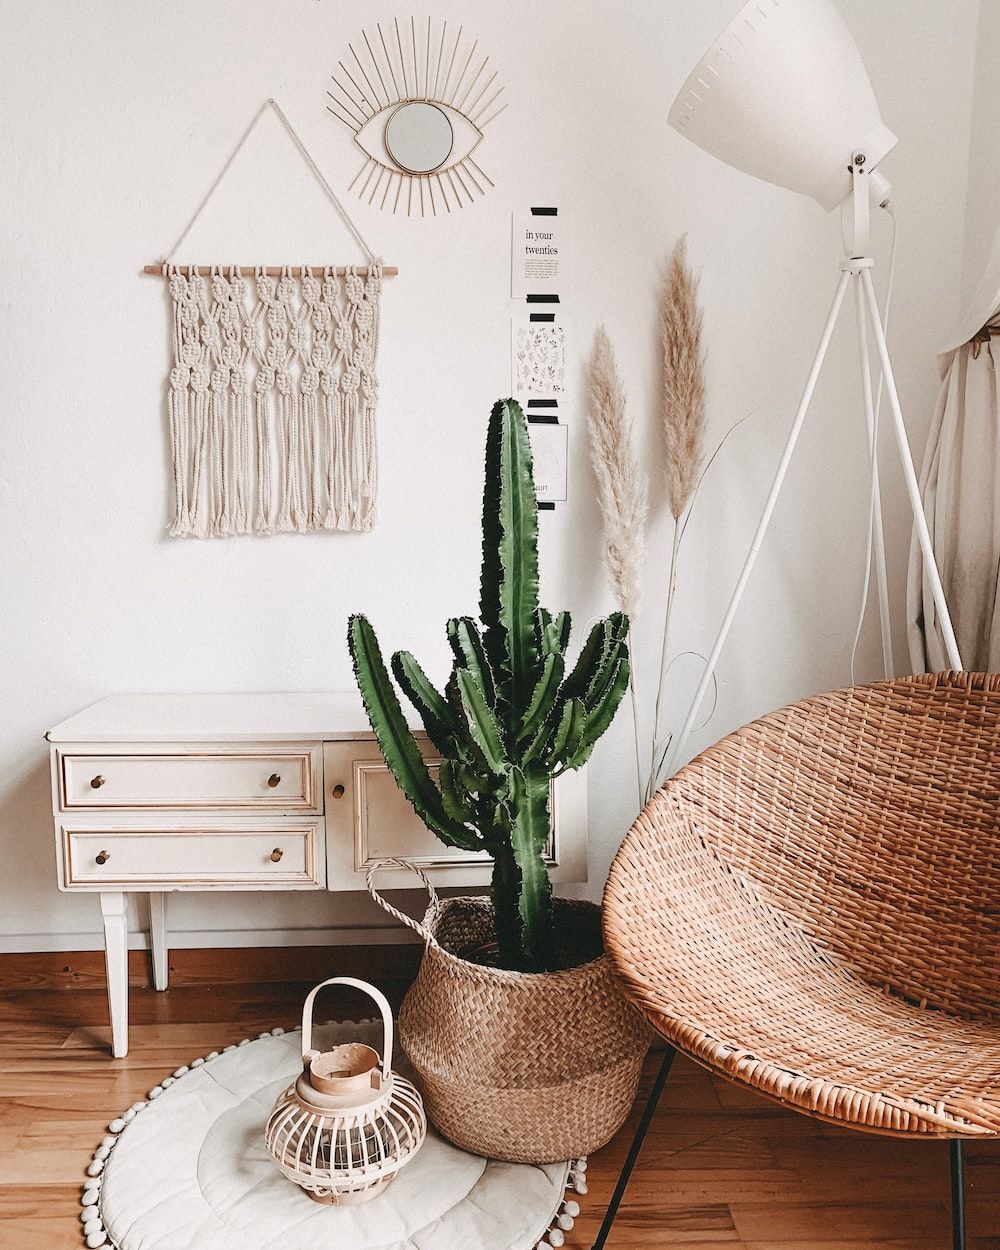 A cactus sitting on the floor next to some furniture - Boho, cactus